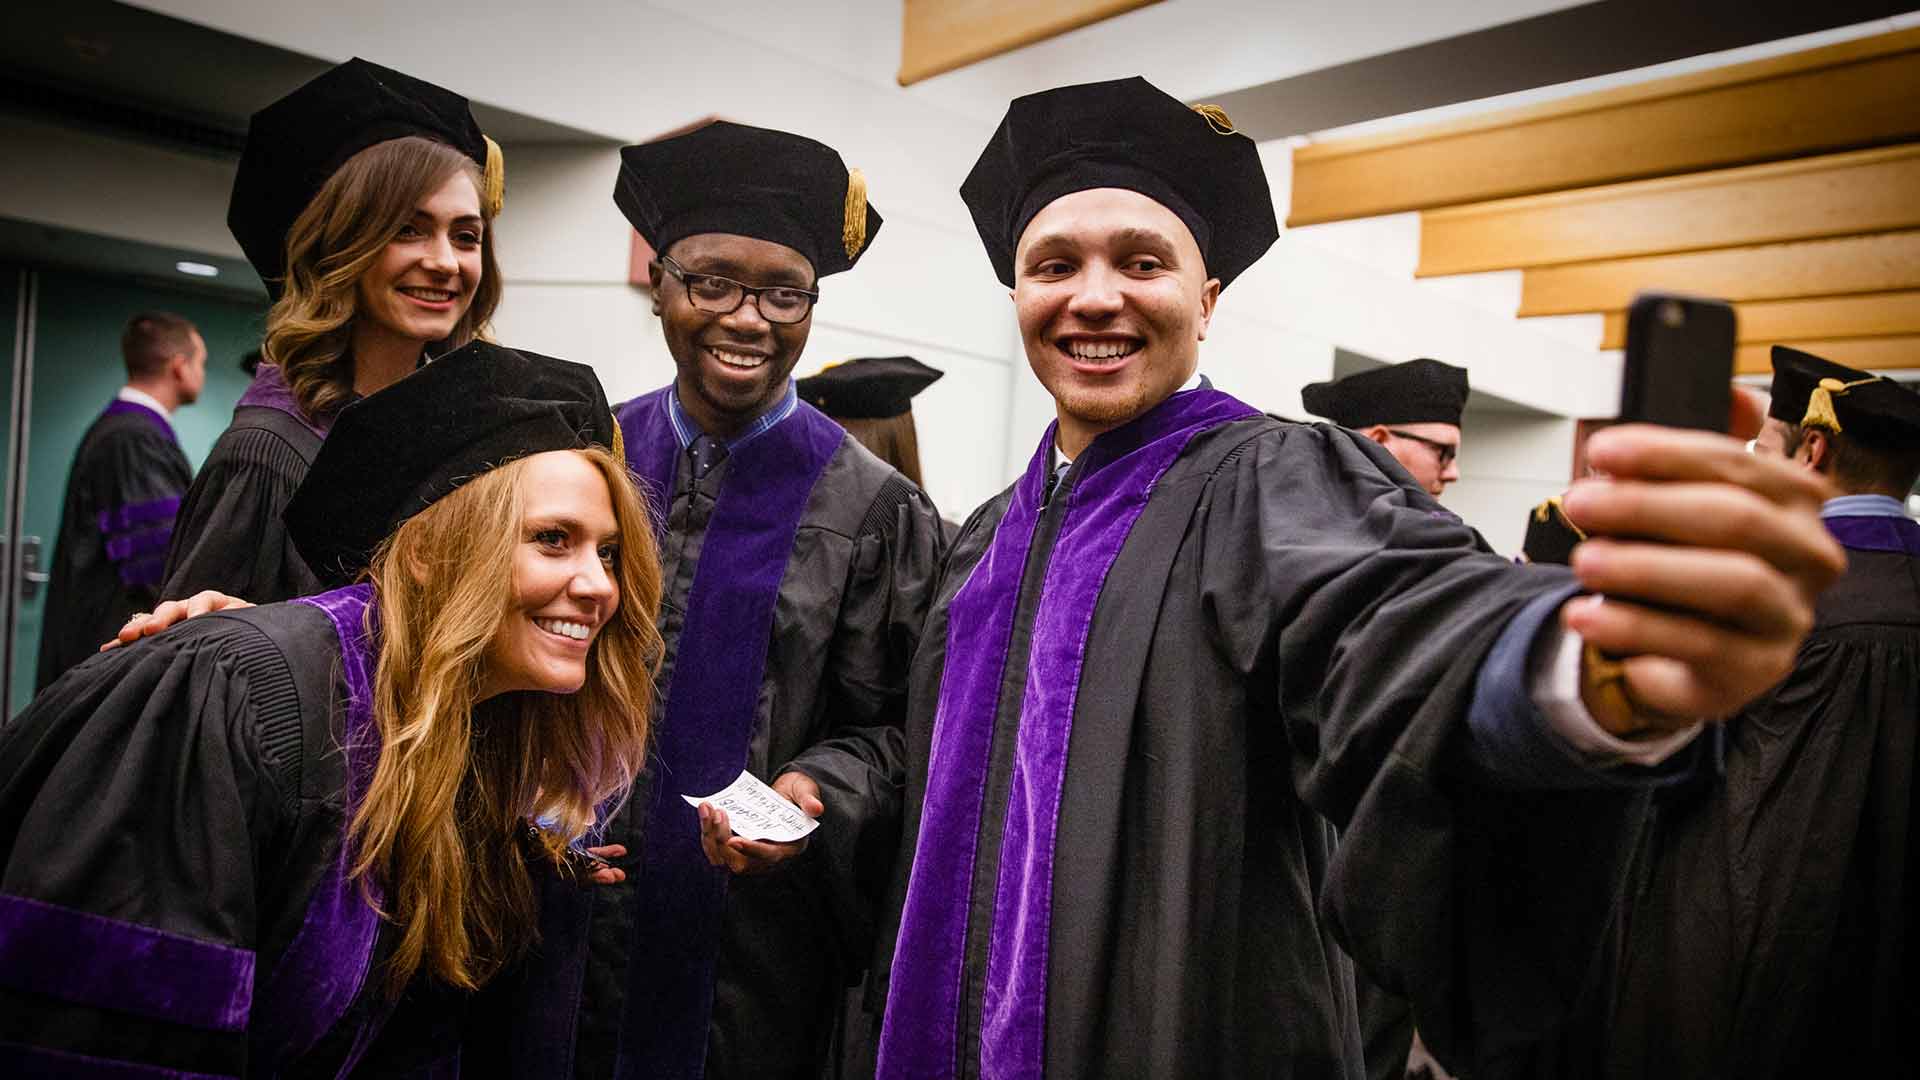 Law students pose for a selfie at graduation.